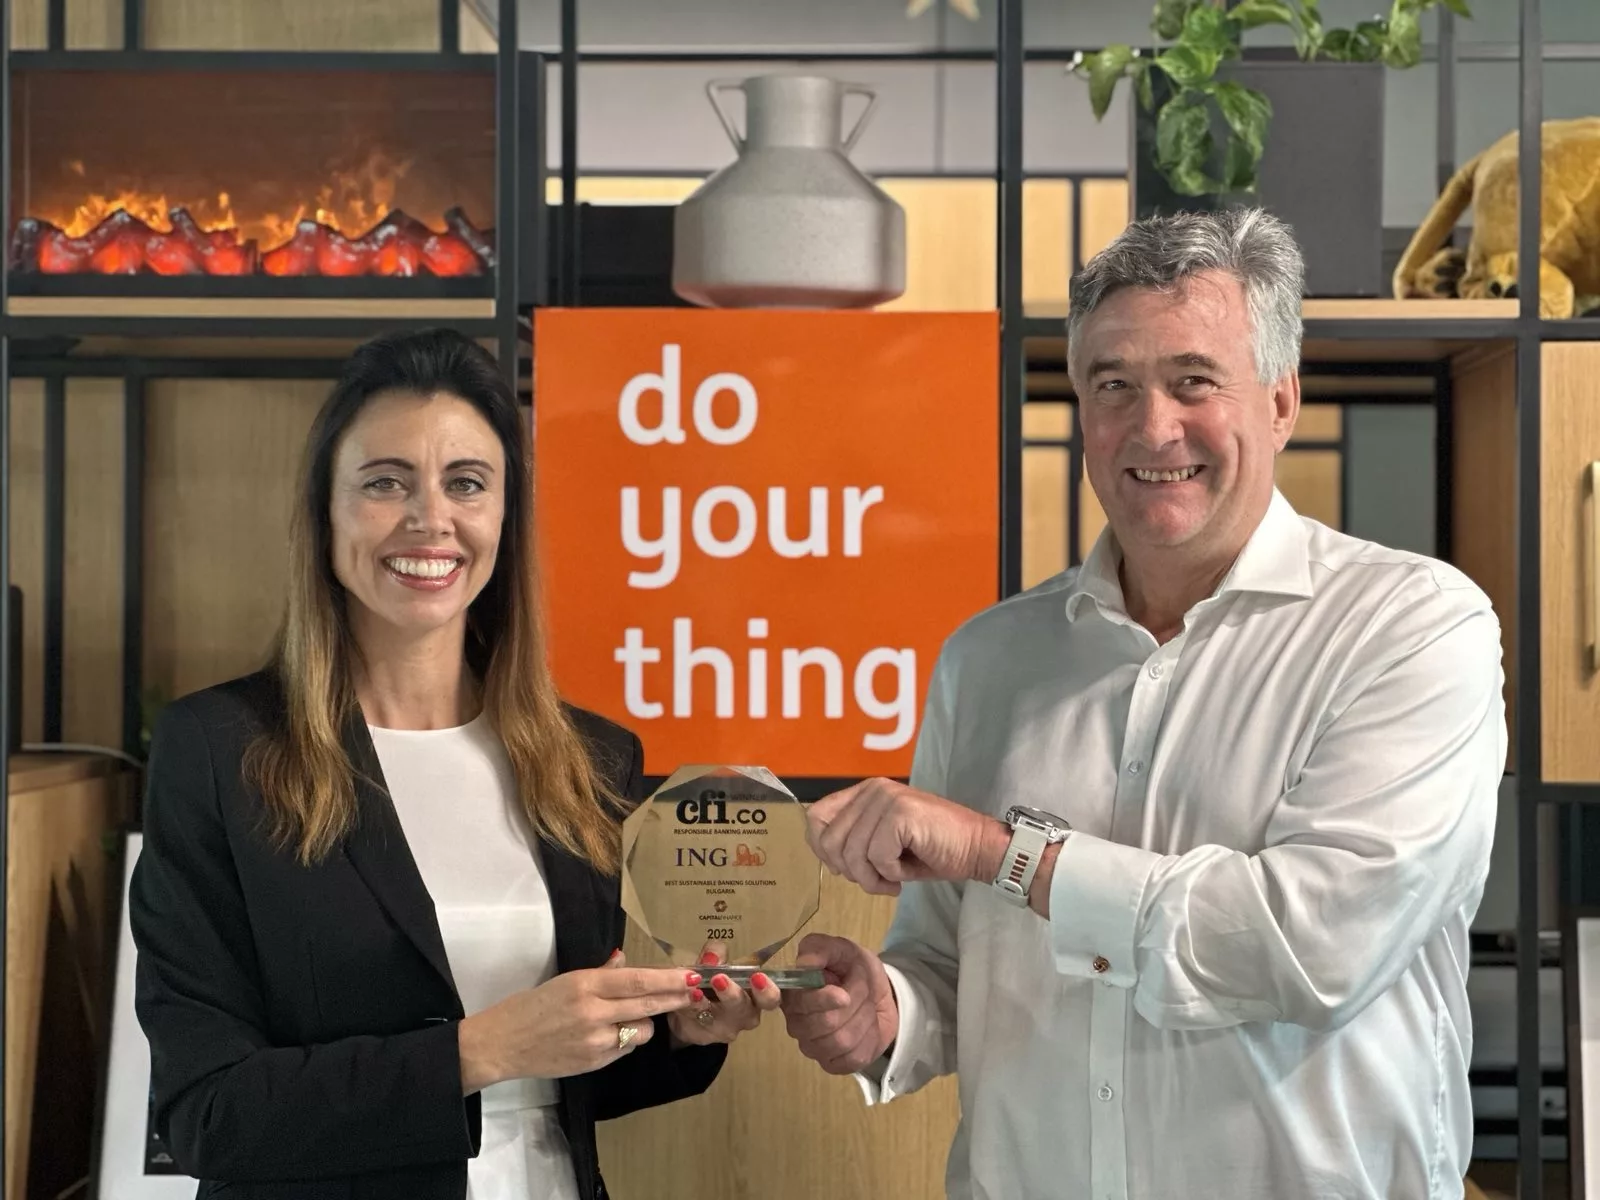 Marina Kobakova, Country Manager ING Bank N.V. Bulgaria and Mr. Andrew Bester, ING Head of Wholesale Banking and Member of Management Board Banking.